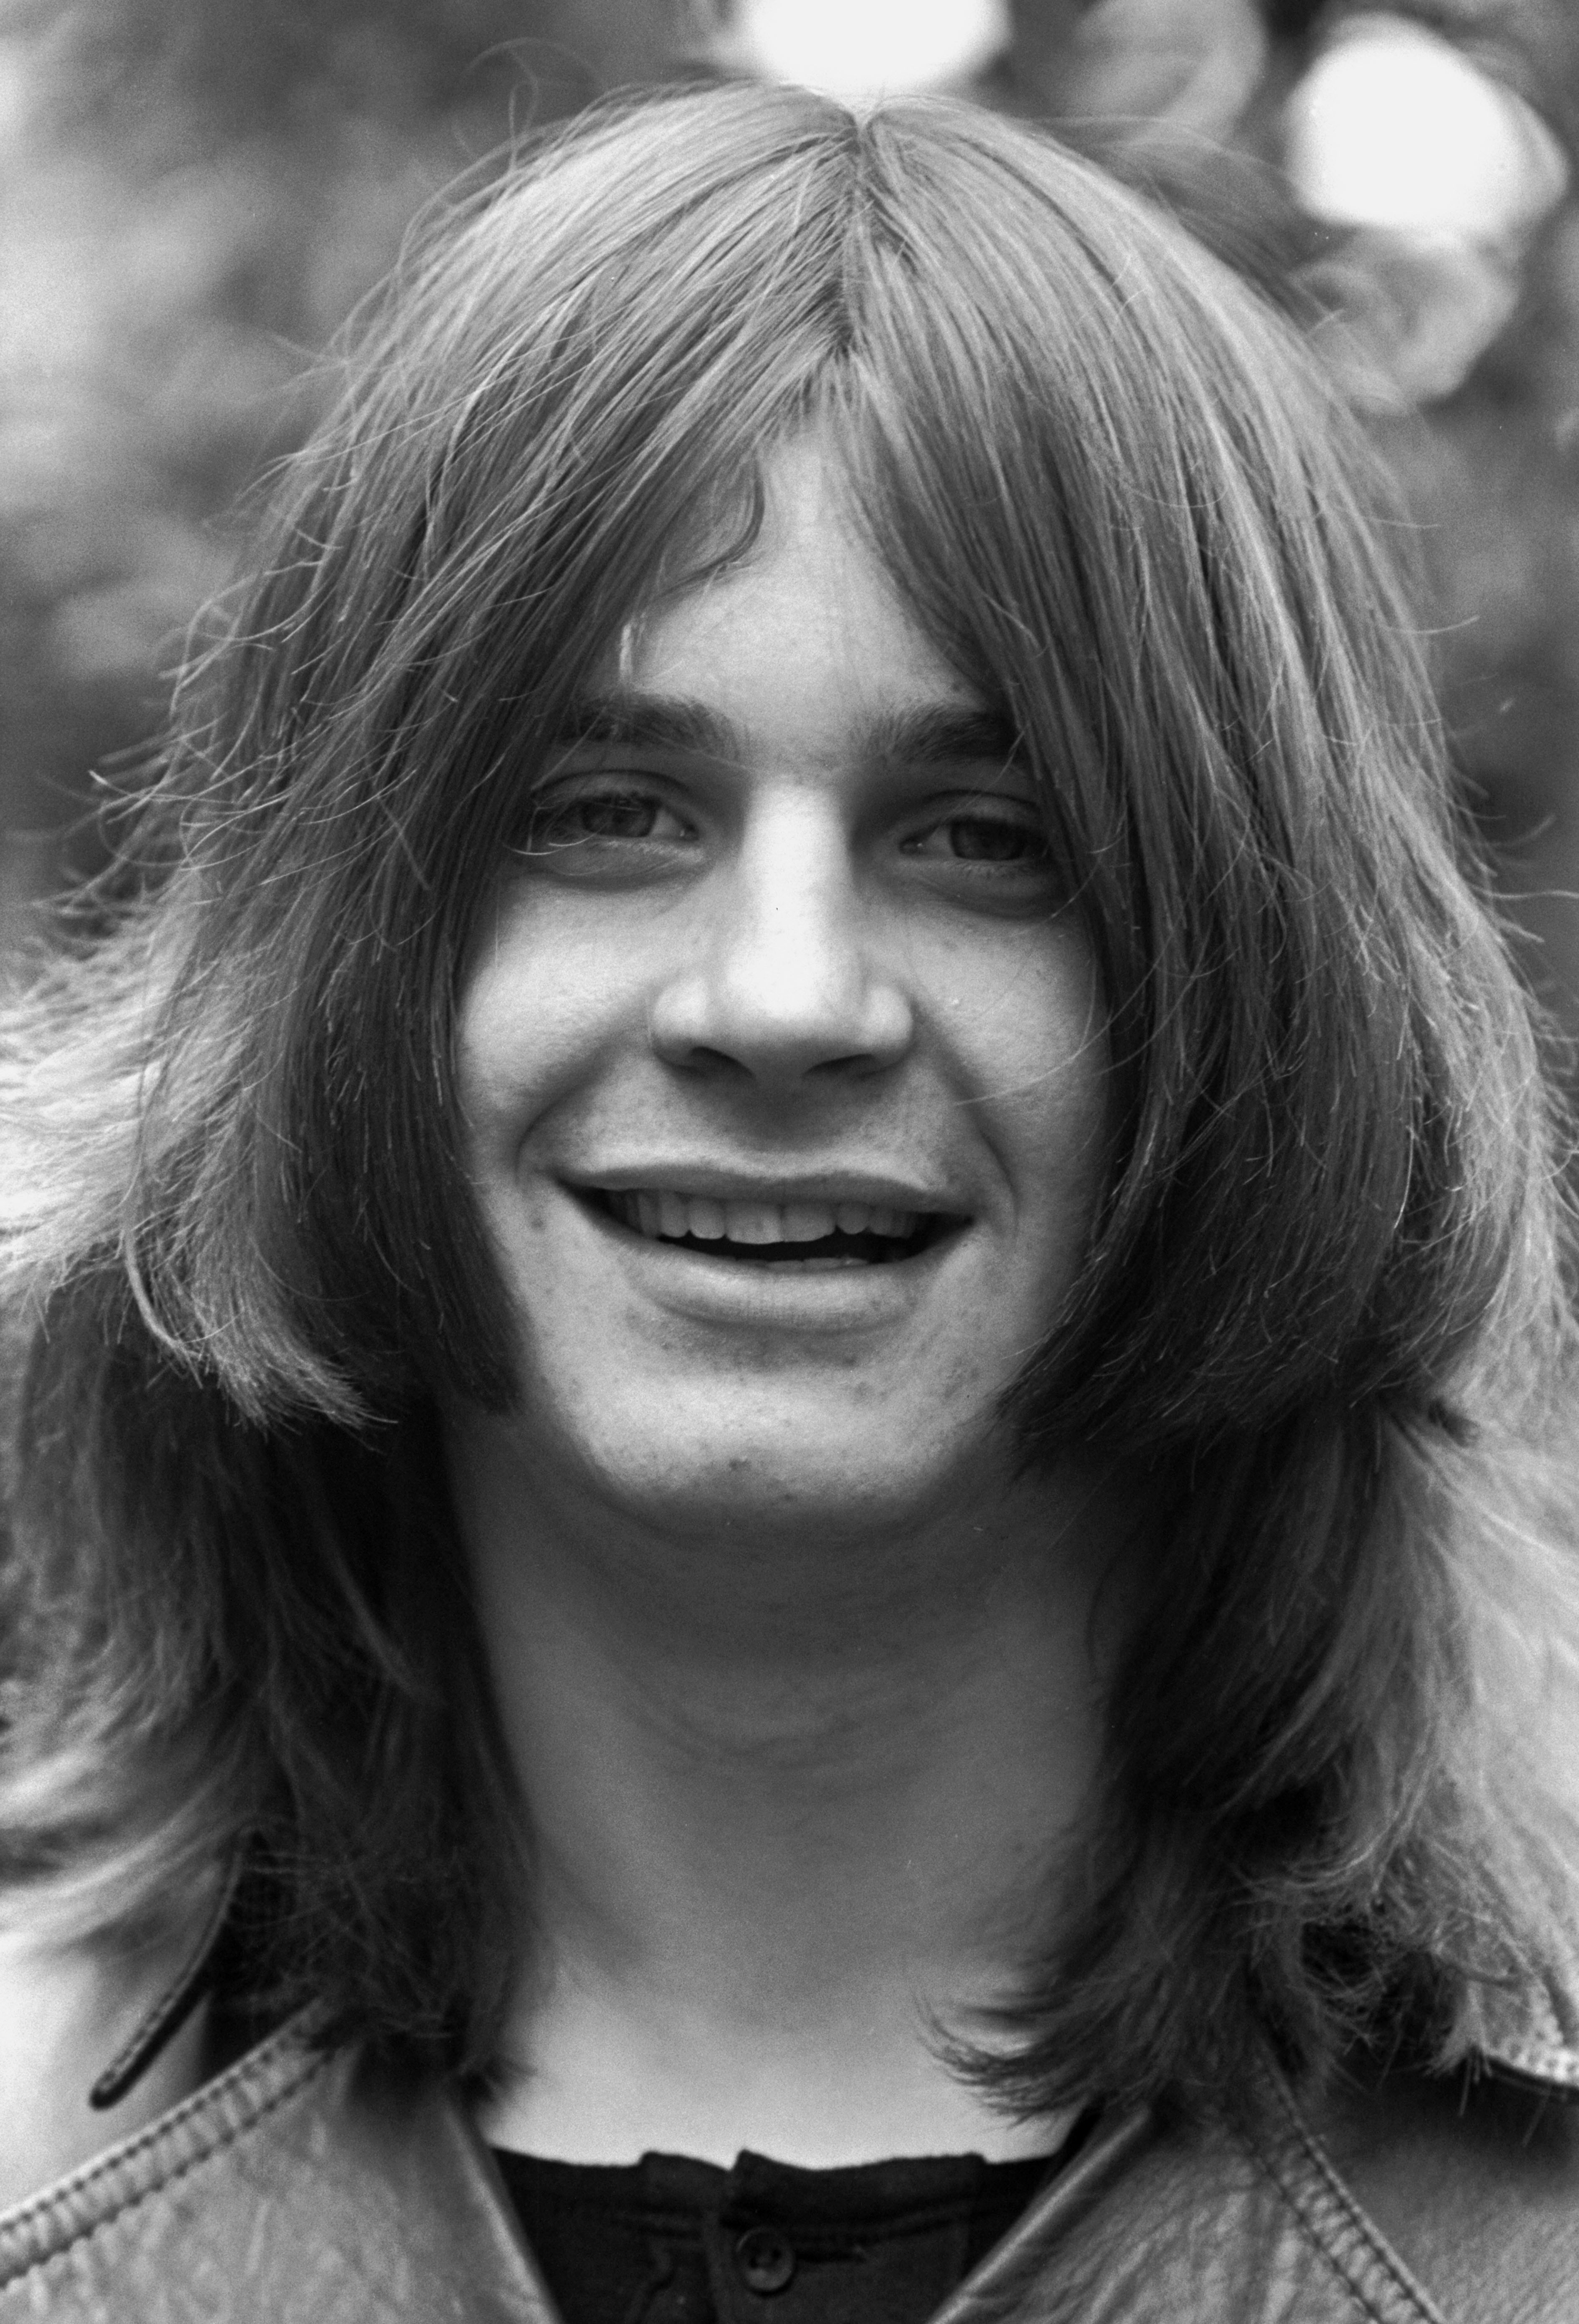 Ozzy Osbourne photographed on January 1, 1970 | Source: Getty Images